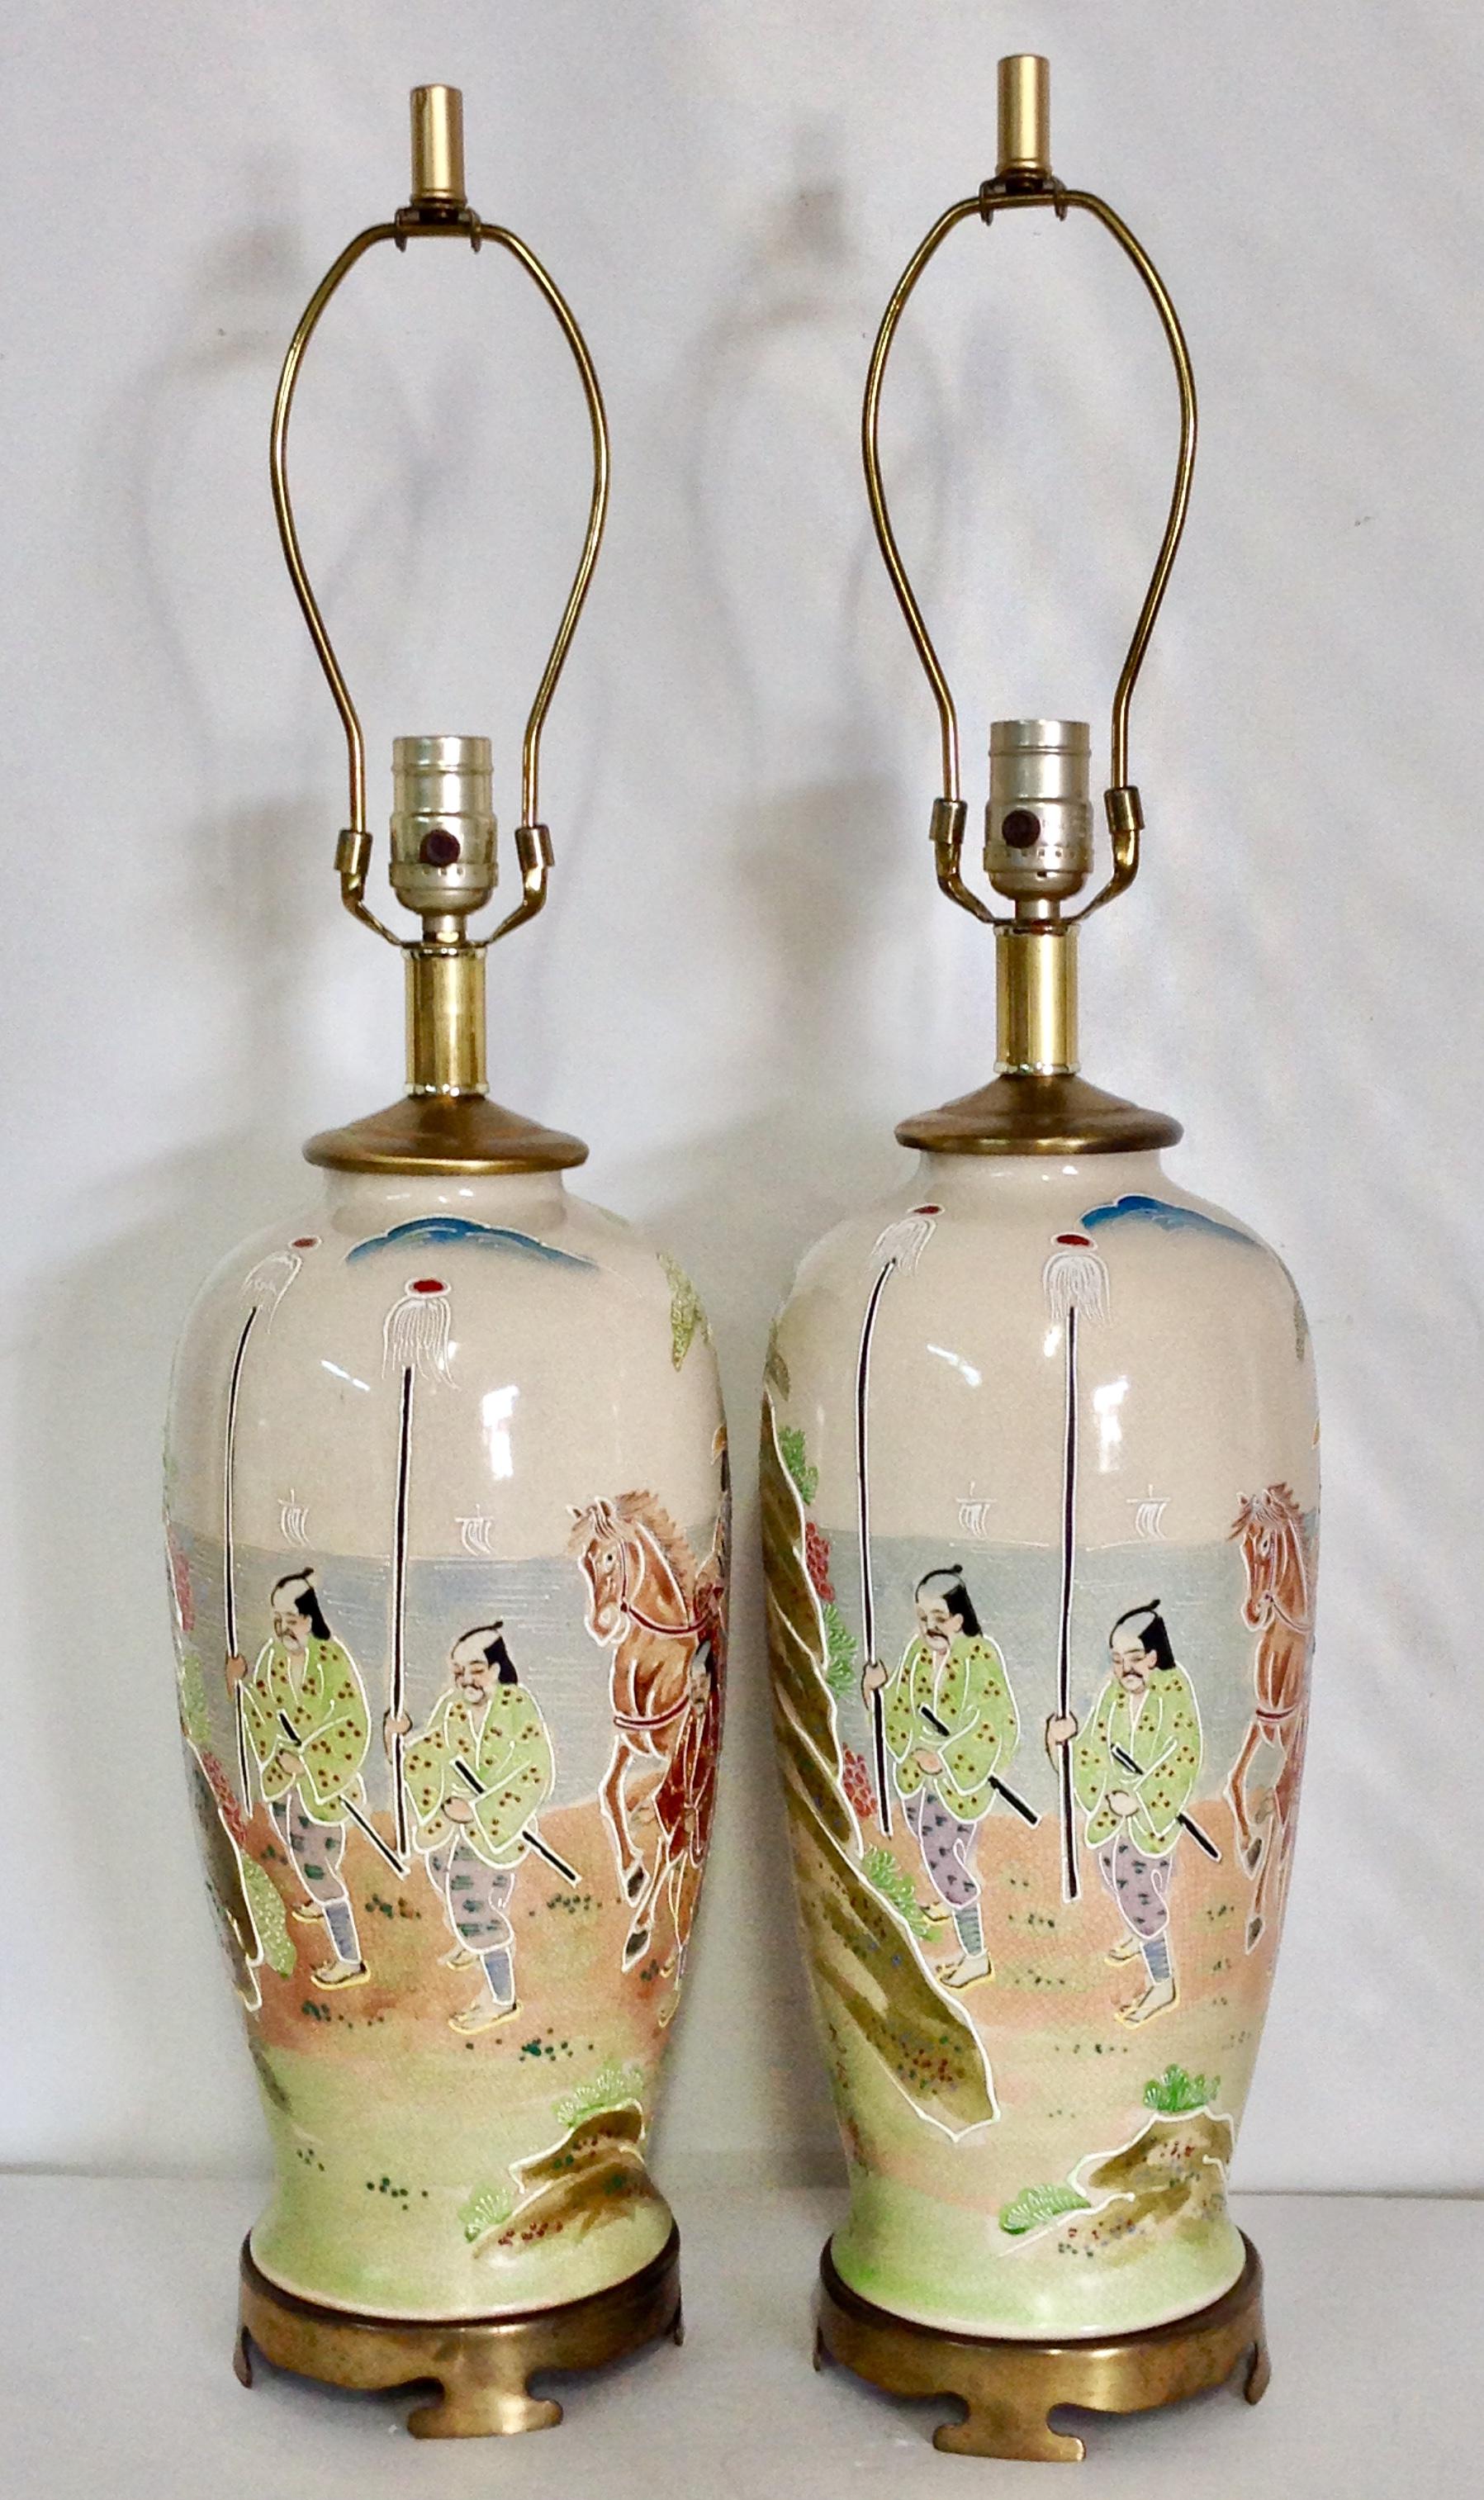 20th Century Pair Of antique Japanese hand painted porcelain Satsuma Moriage Crackle  lamps on the original brass bases in the style know as Kyoto Satsuma. Each lamp is signed on the body by the artist. Hand-painted with raised texture/moriage